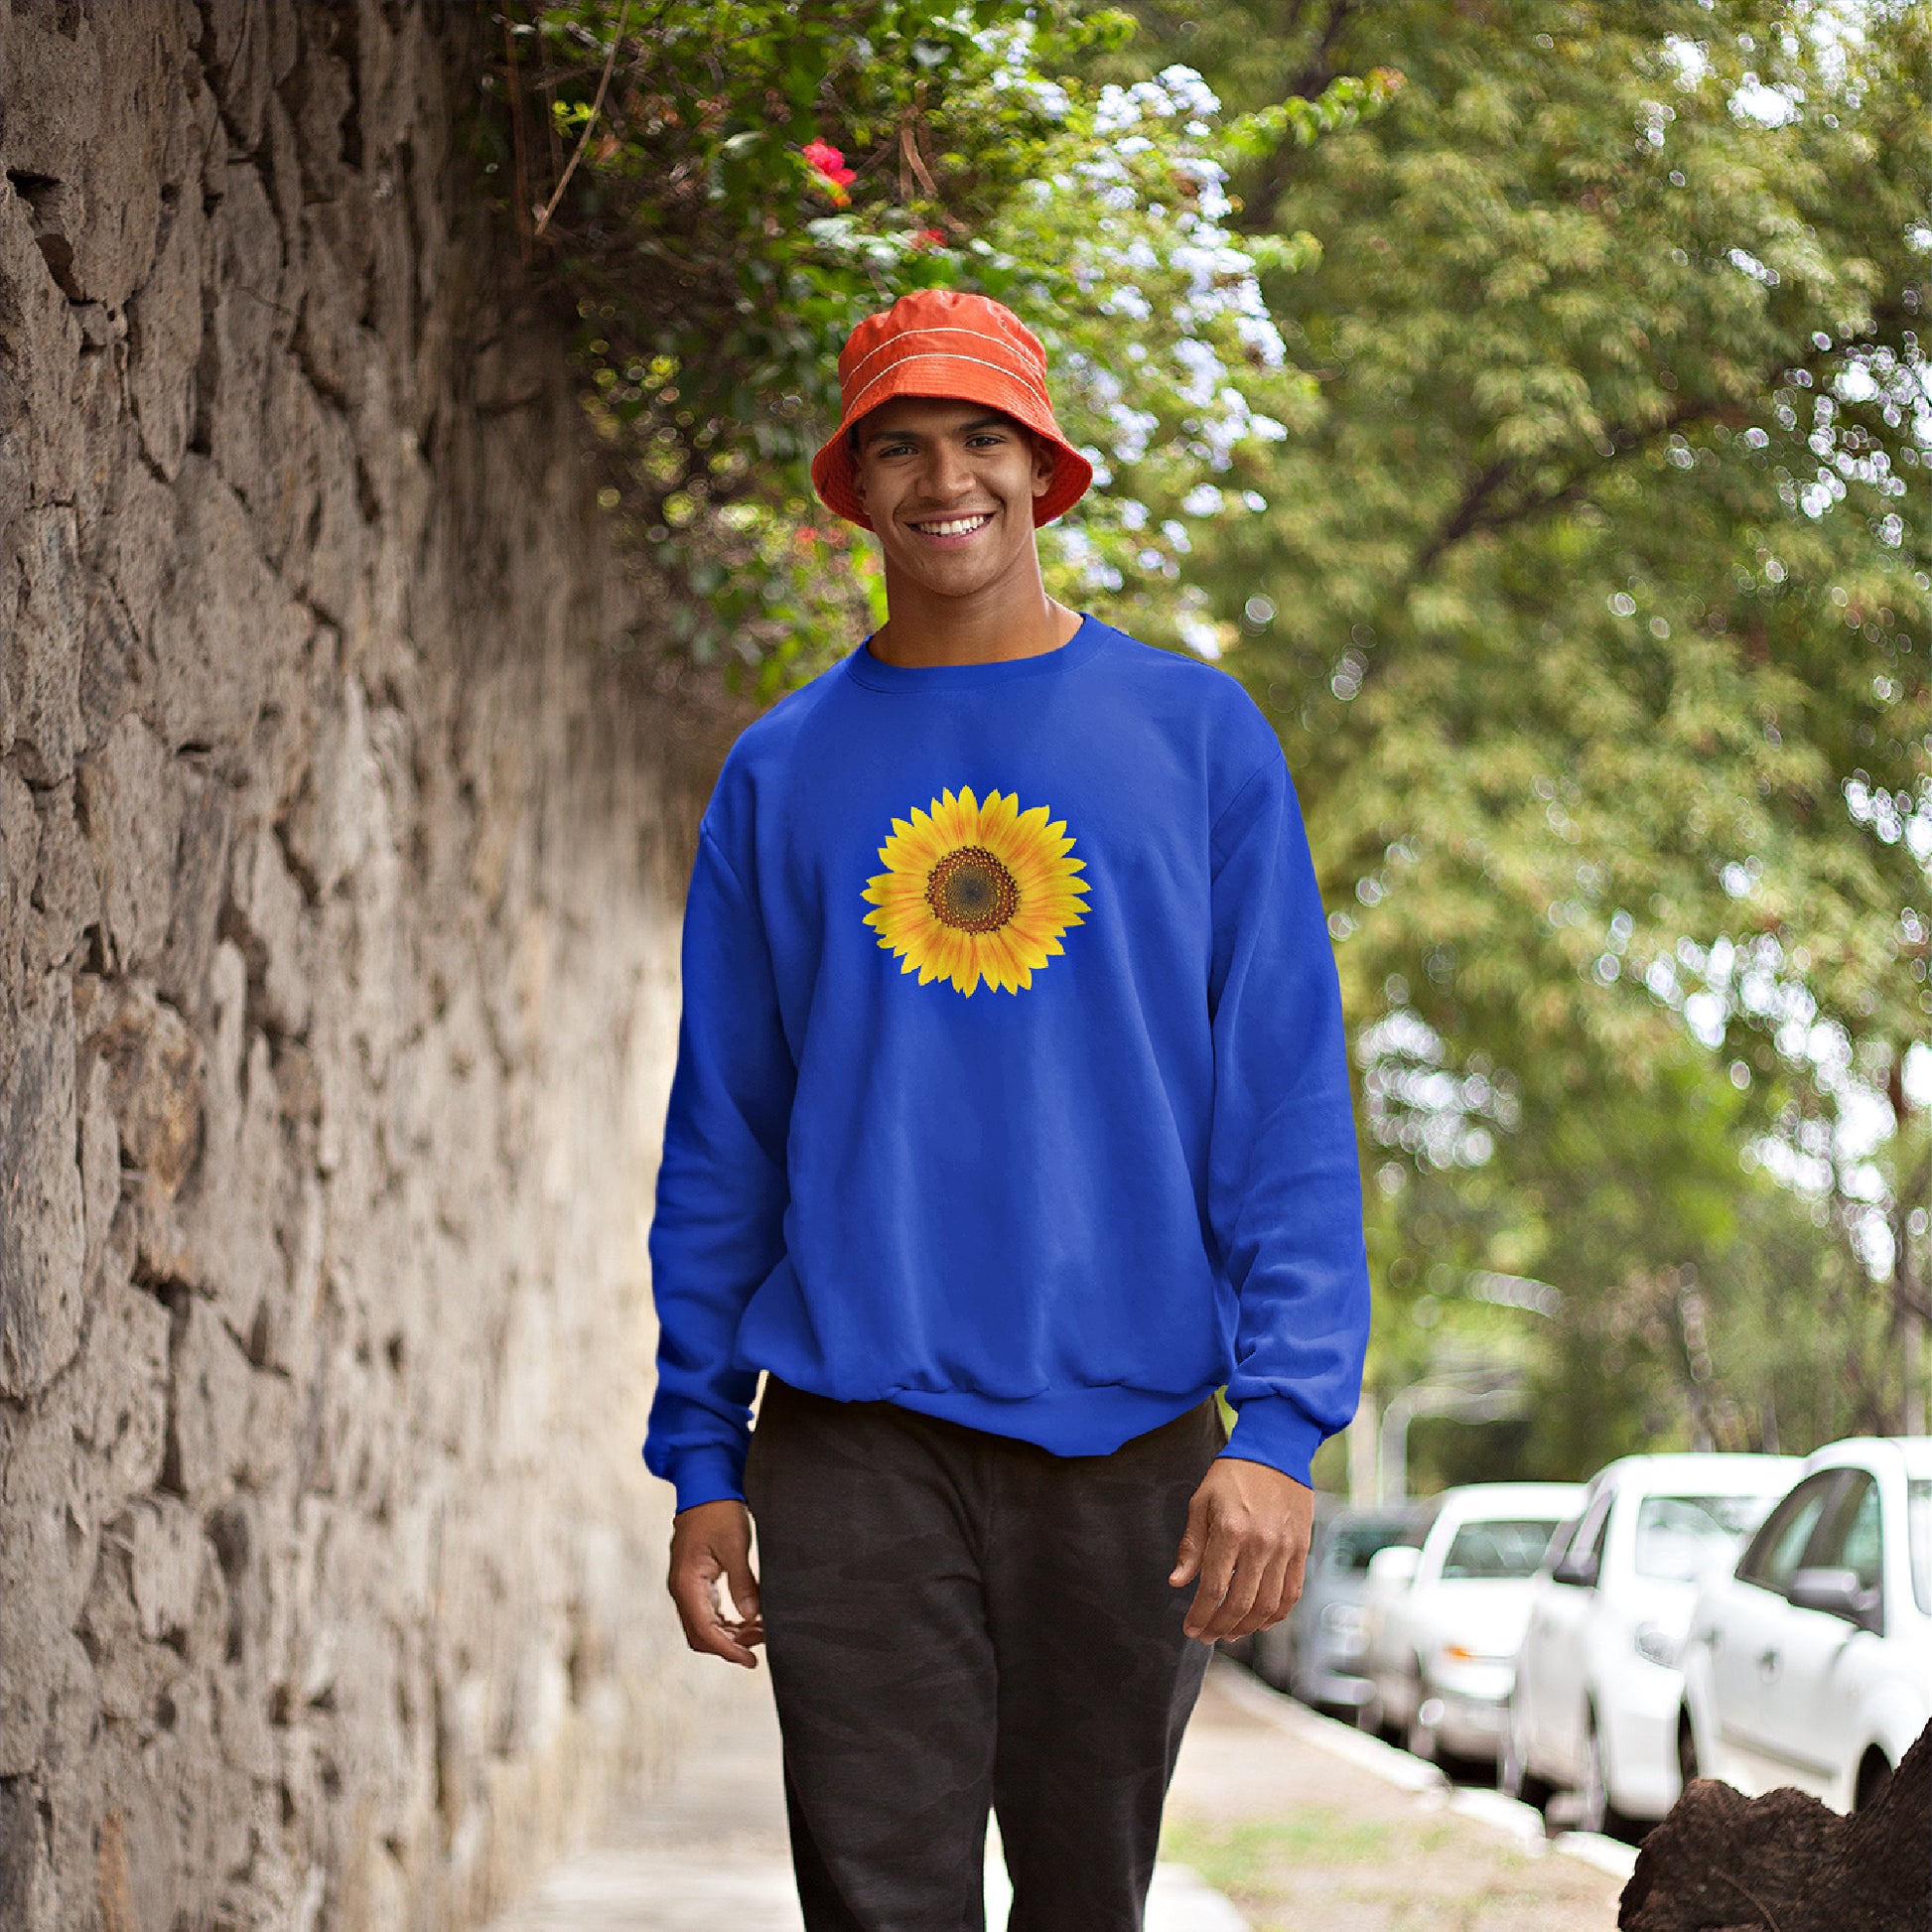 Mock up of a happy man walking down the street and wearing the  Royal blue sweatshirt